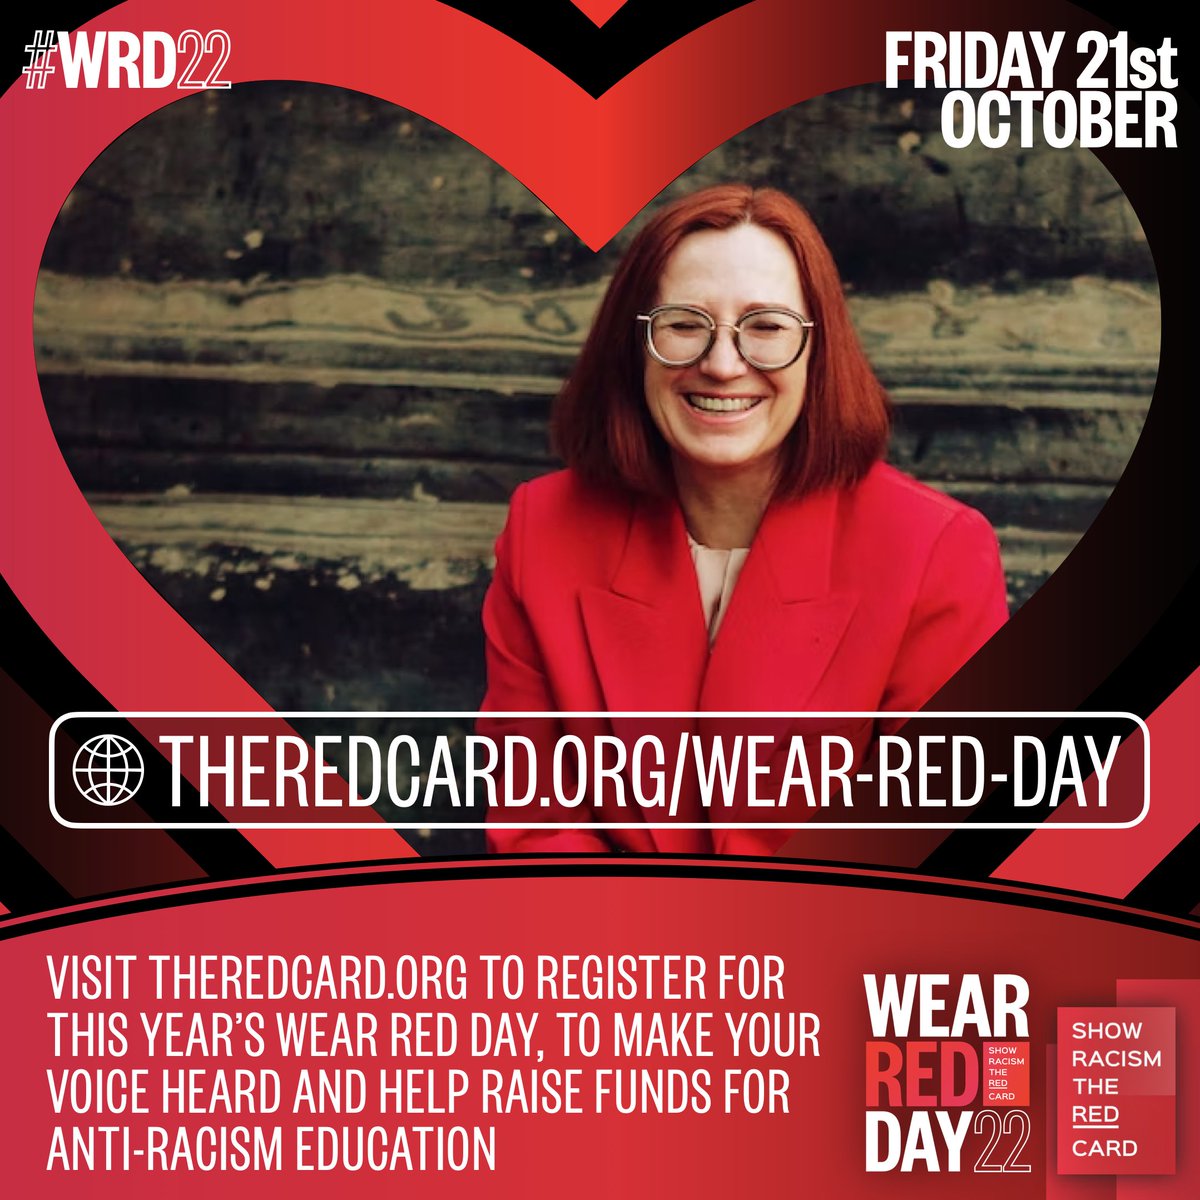 #WRD22: Wear Red Day, #SRtRC's annual fundraising day, is fast approaching! Register your involvement now, and help chip-in to Show Racism the Red Card. 🔗 theredcard.org/wear-red-day